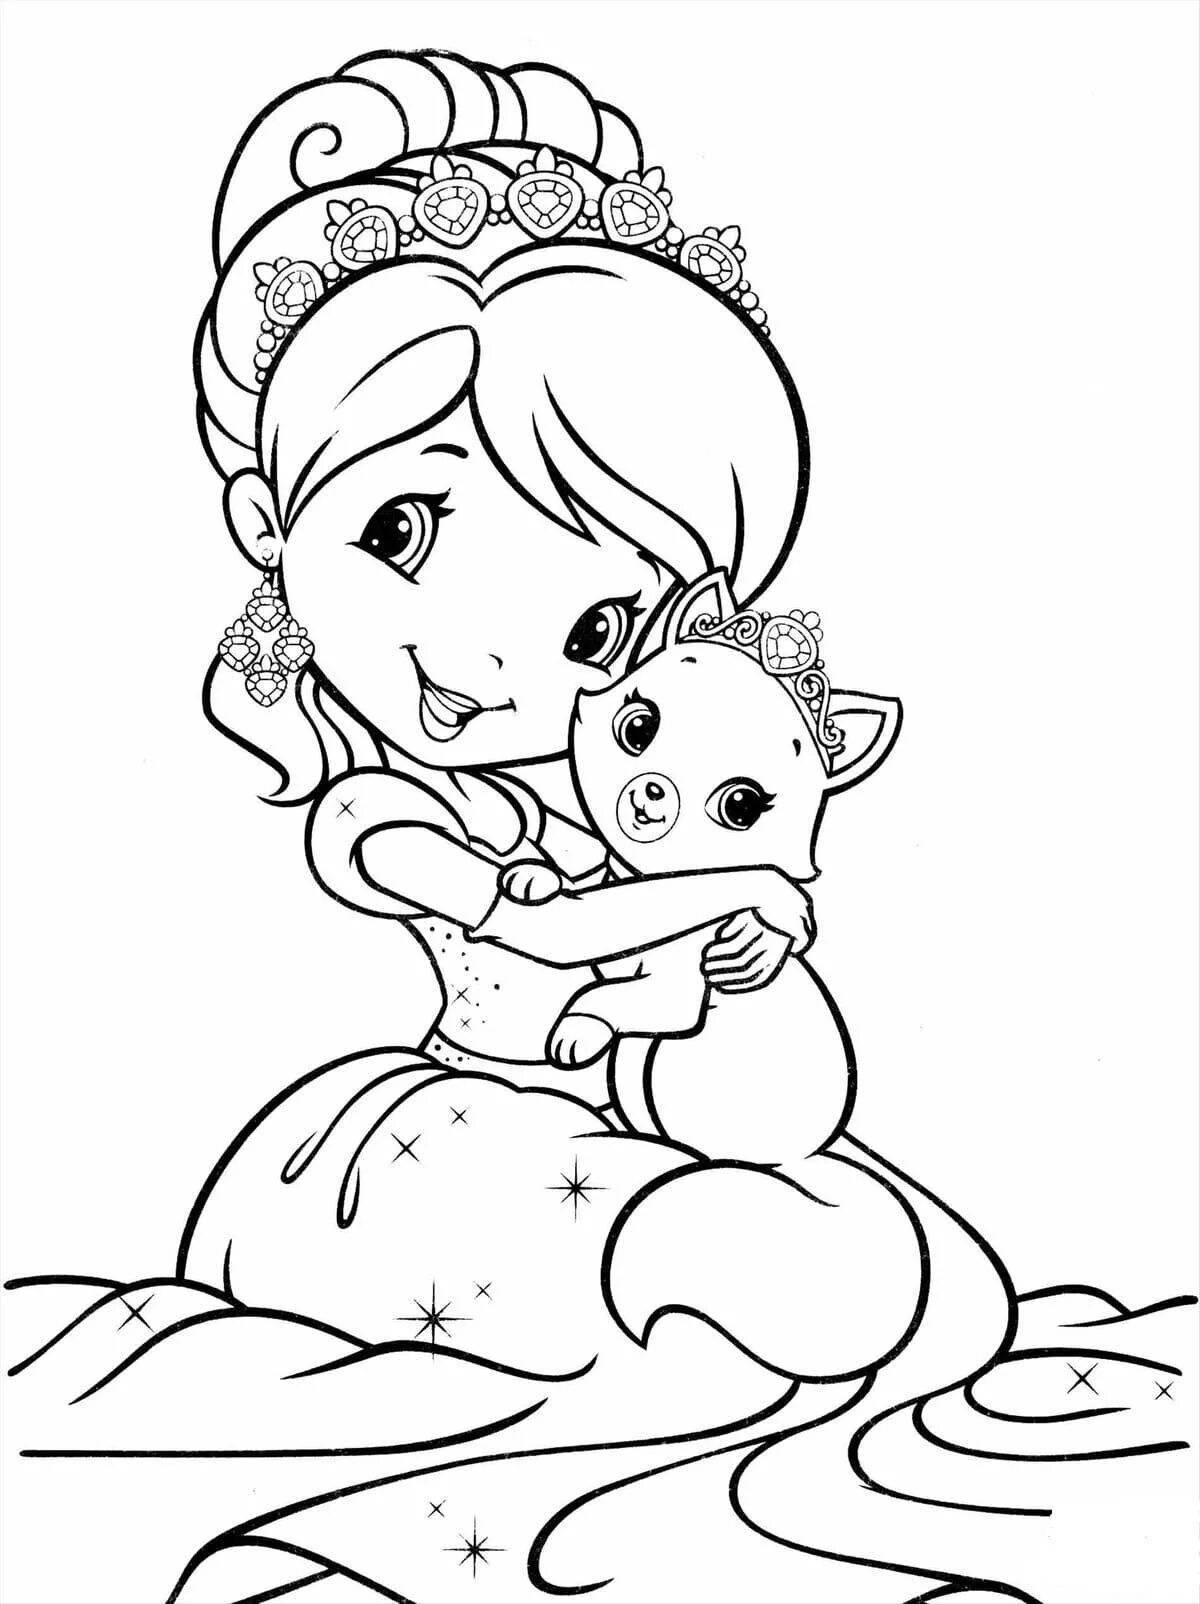 Joyful coloring for children 5-6 years old for girls princess